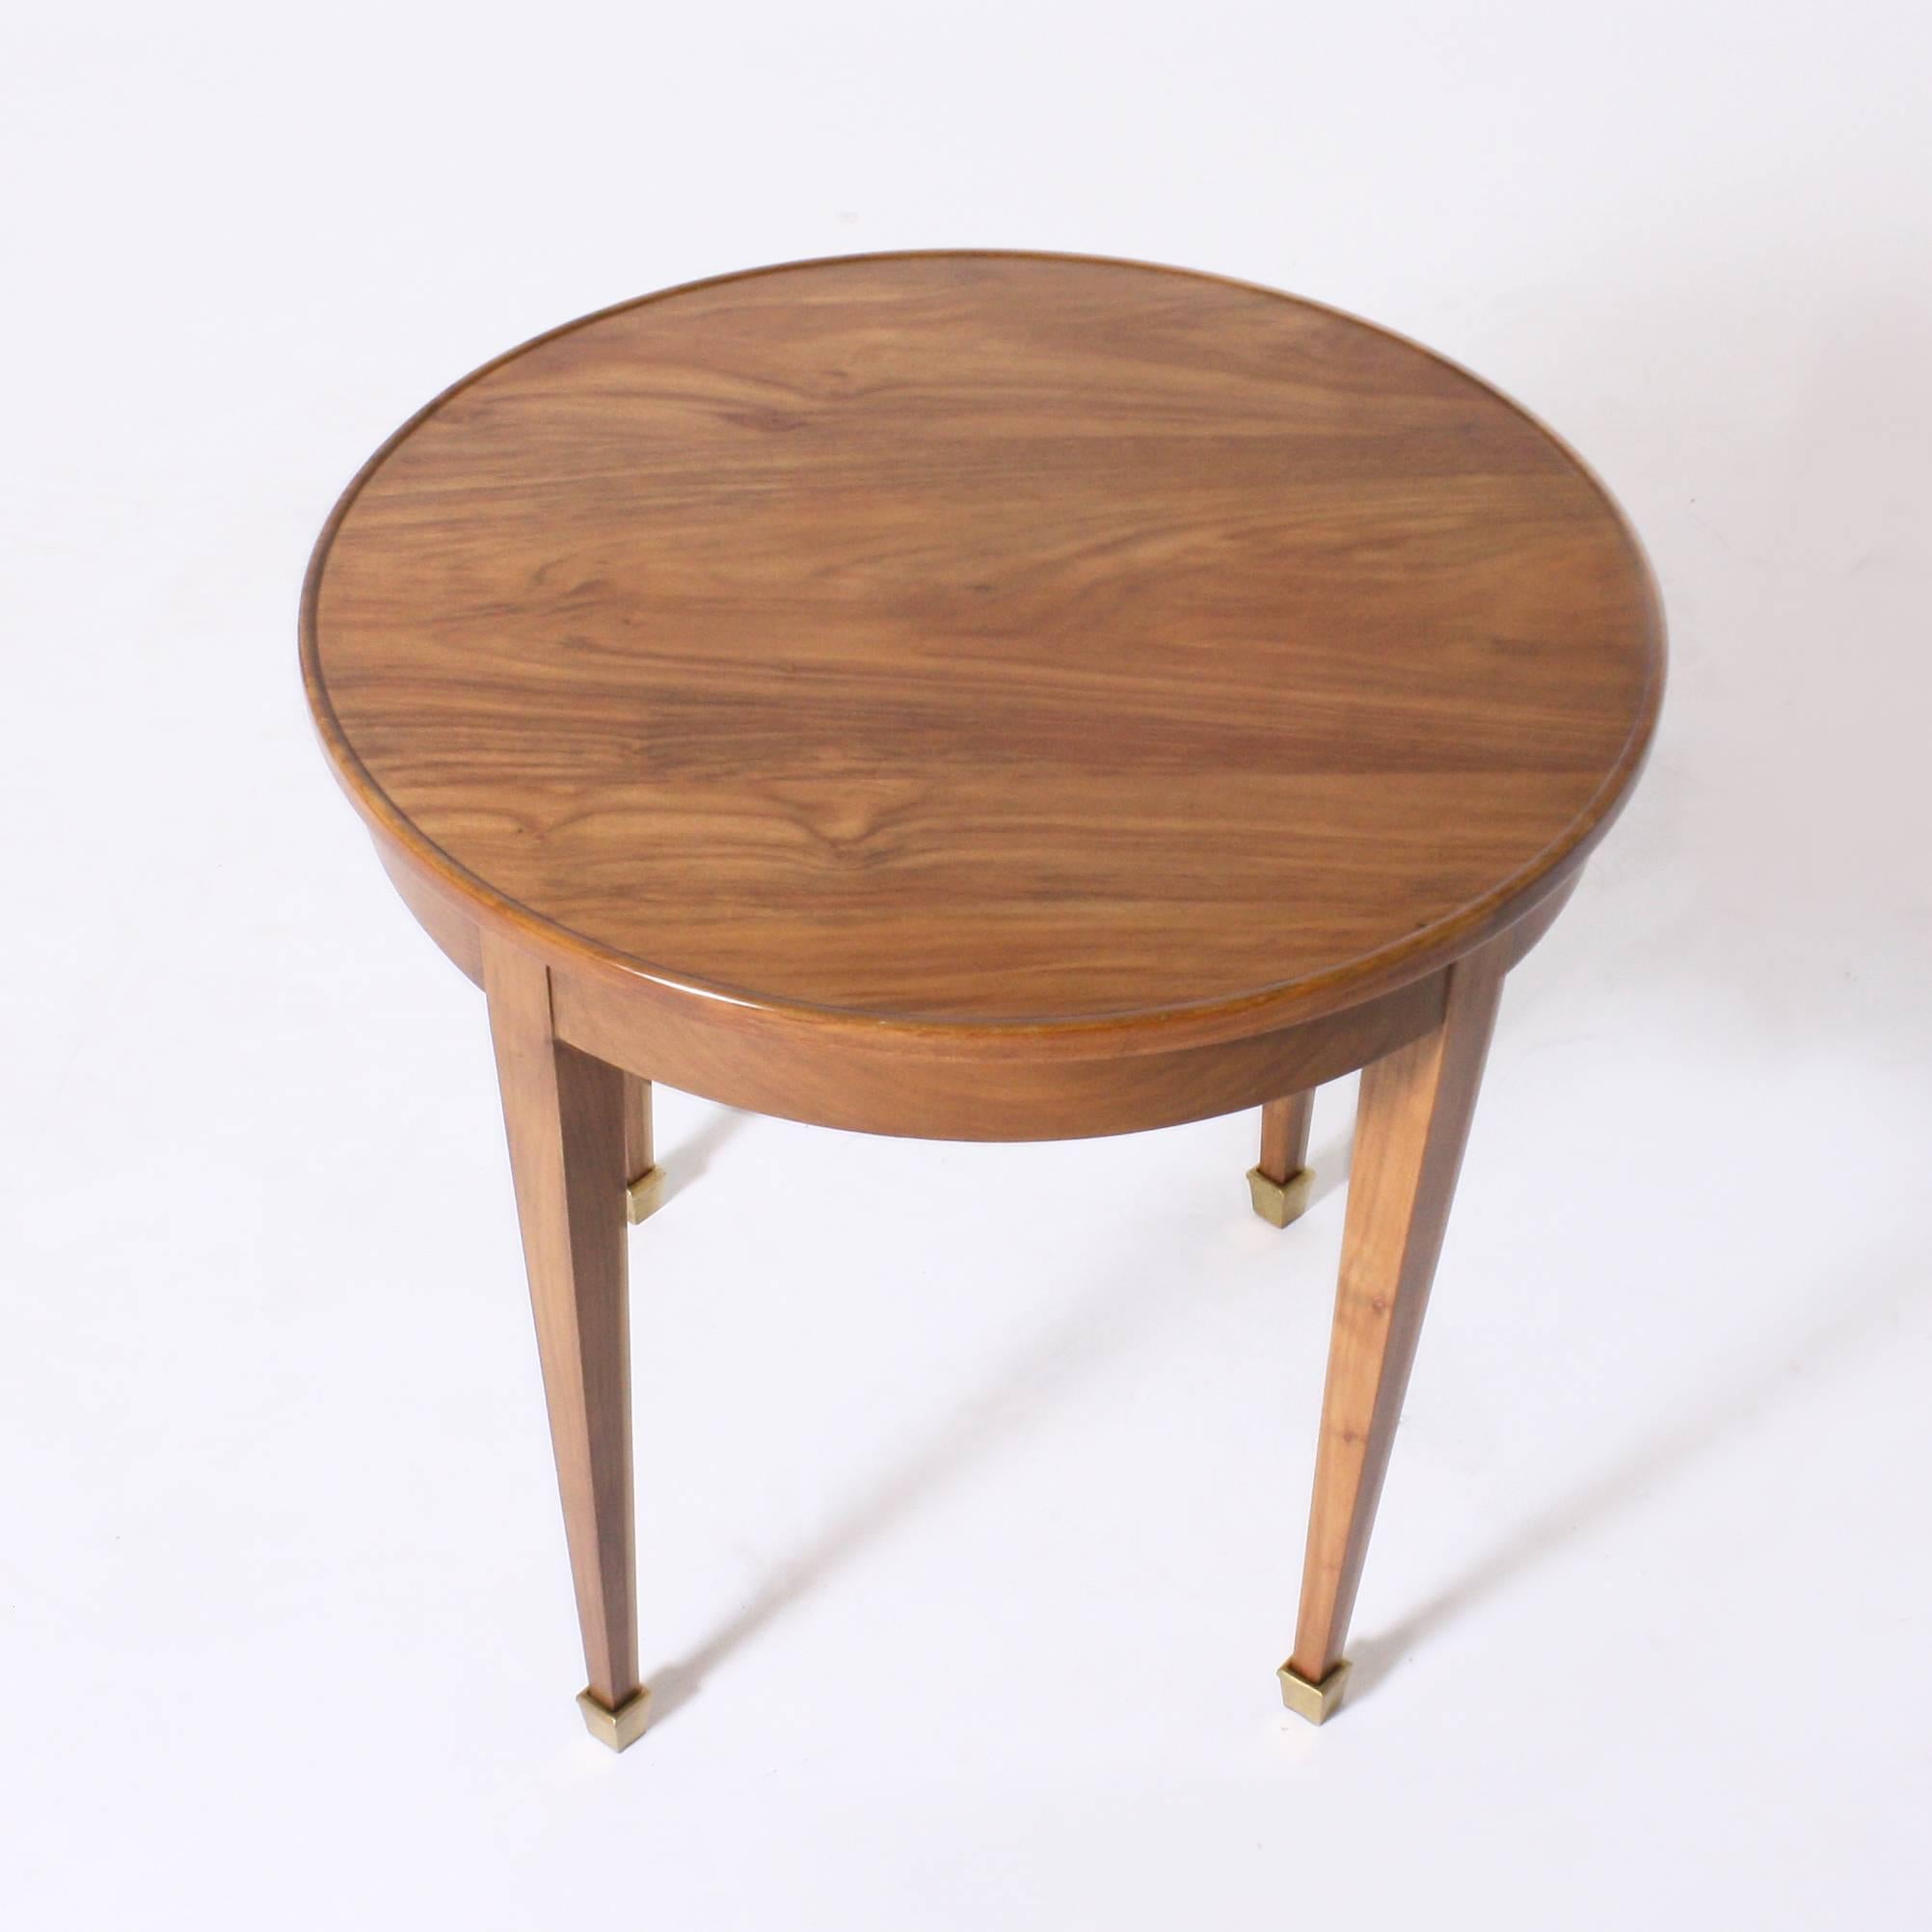 French Small Round Merisier Cigarette Table with Brass Sabots, circa 1940